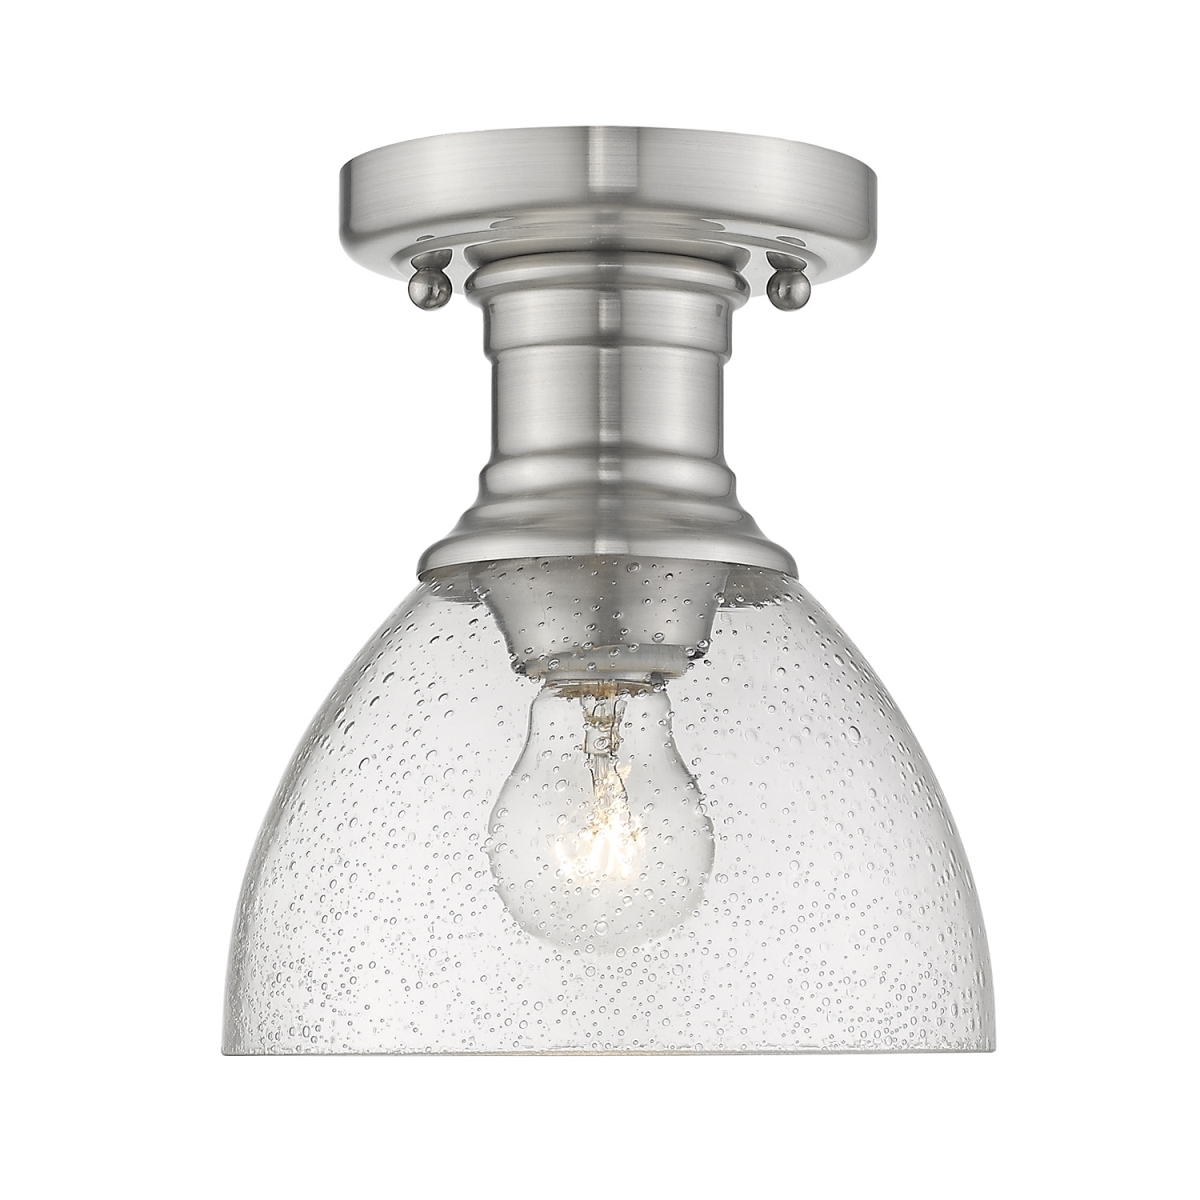 Picture of Golden Lighting 3118-SF PW-SD Hines Semi-Flush Mount Light with Seeded Glass, Pewter